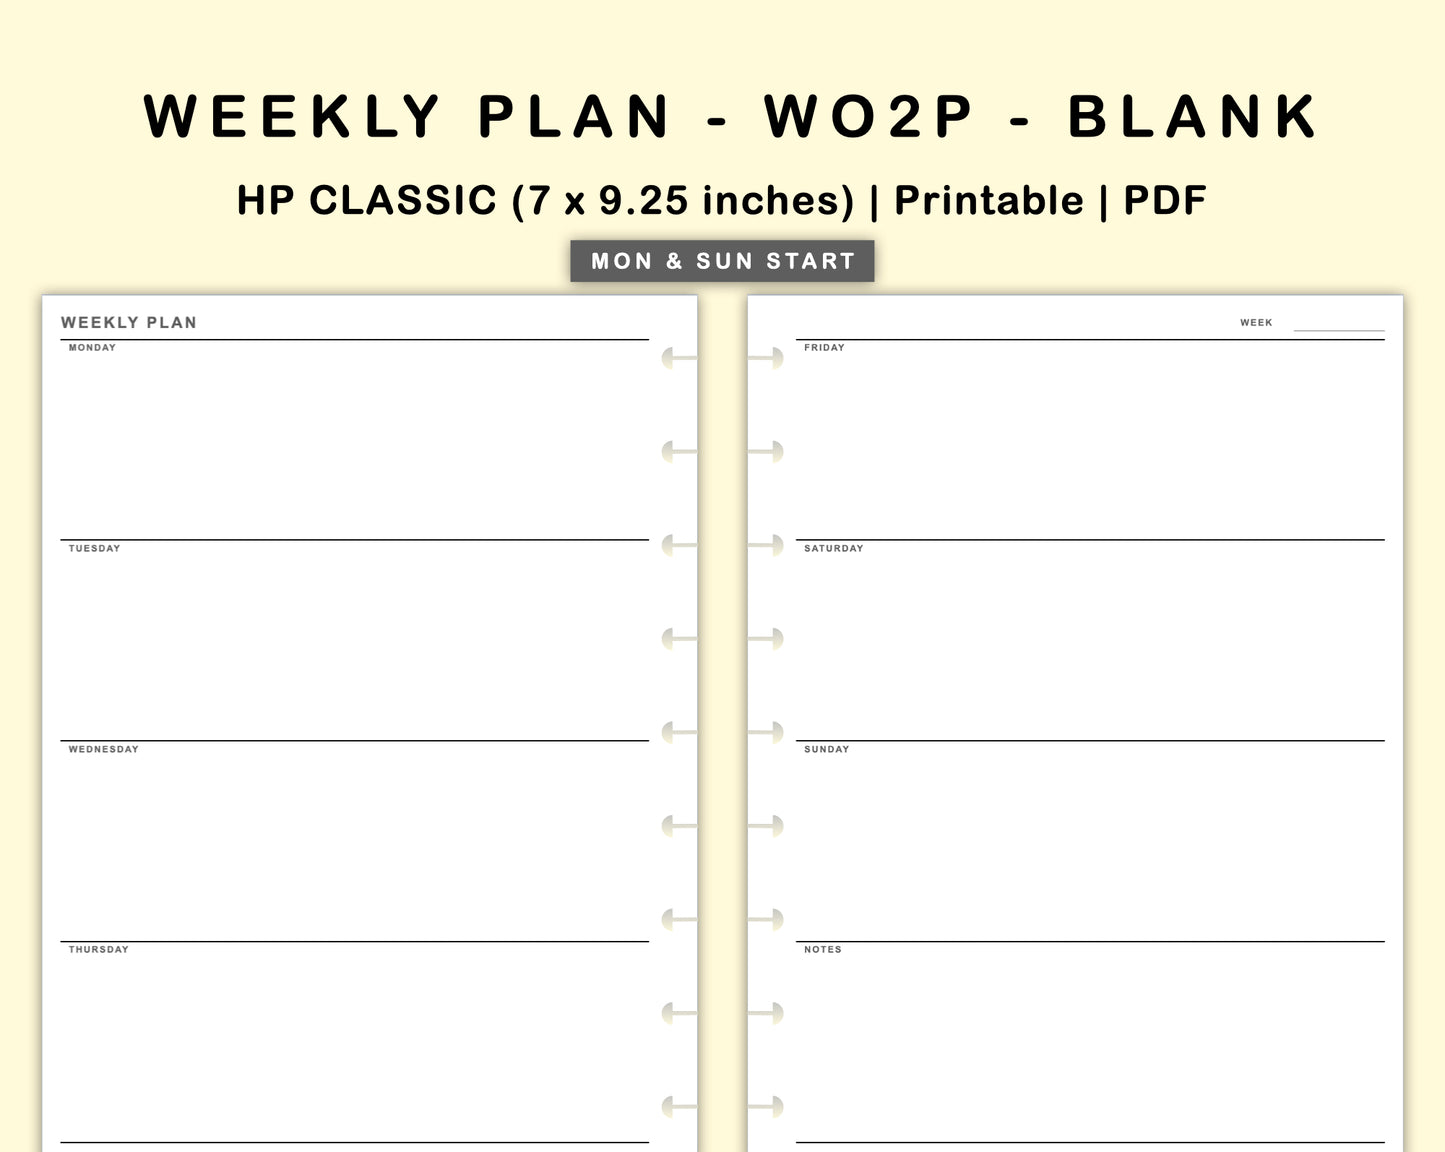 Classic HP Inserts - Weekly Plan - WO2P - Blank